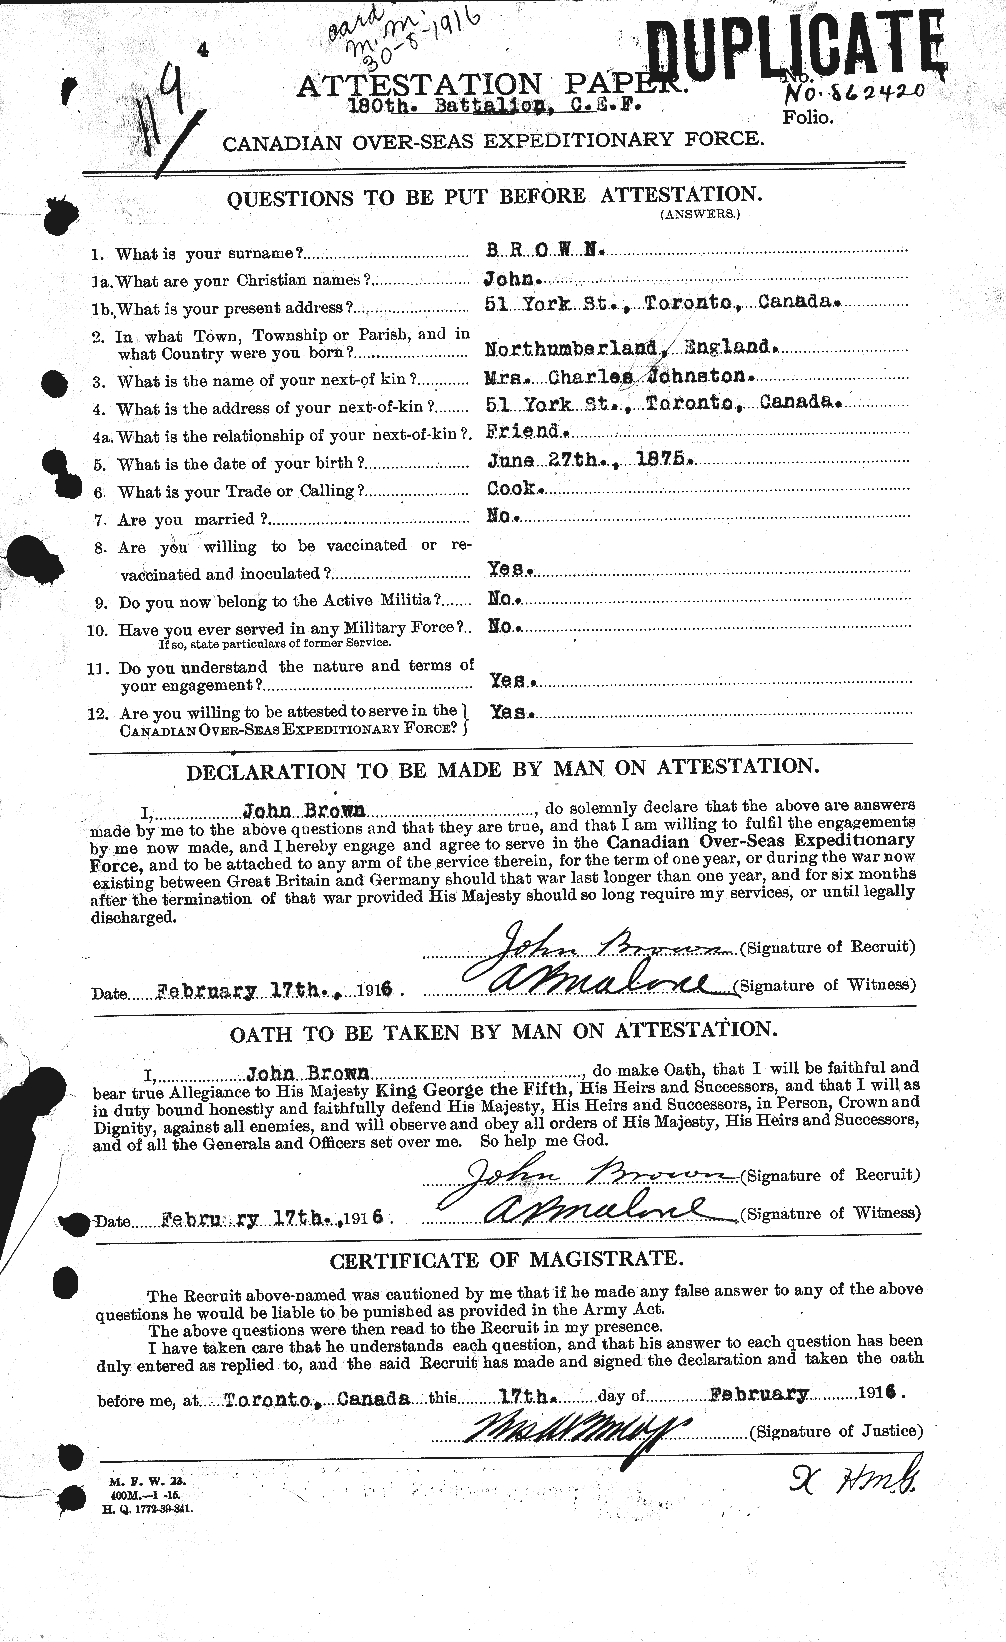 Personnel Records of the First World War - CEF 263869a